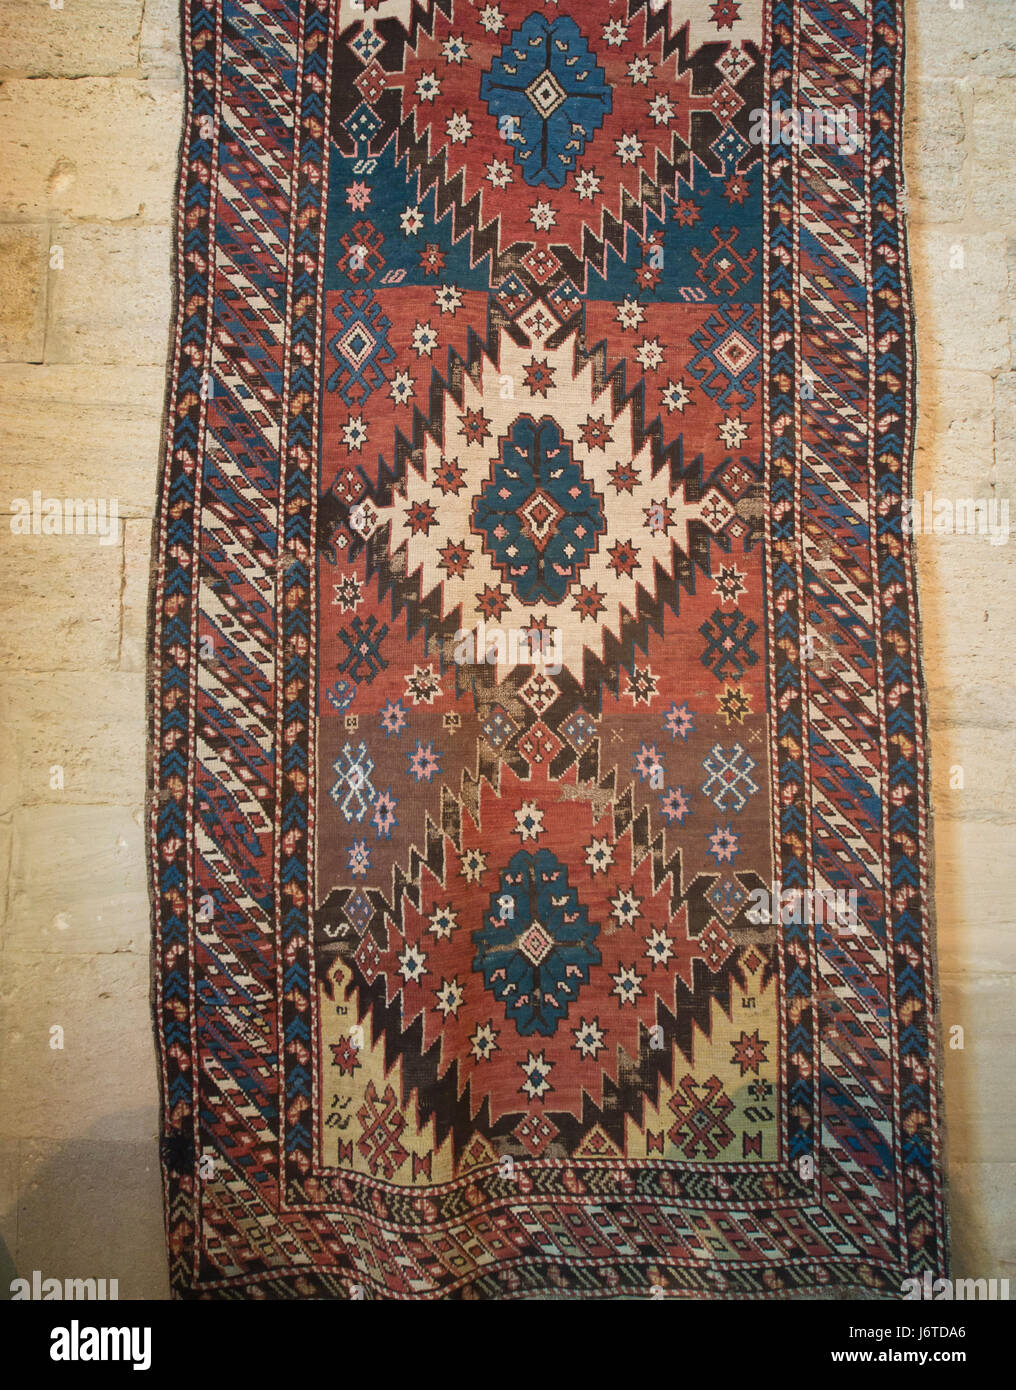 Palace of the Shirvanshahs, a Unesco world heritage site in the old walled city in Baku Azerbaijan, yollug 19th century carpet in the museum Stock Photo